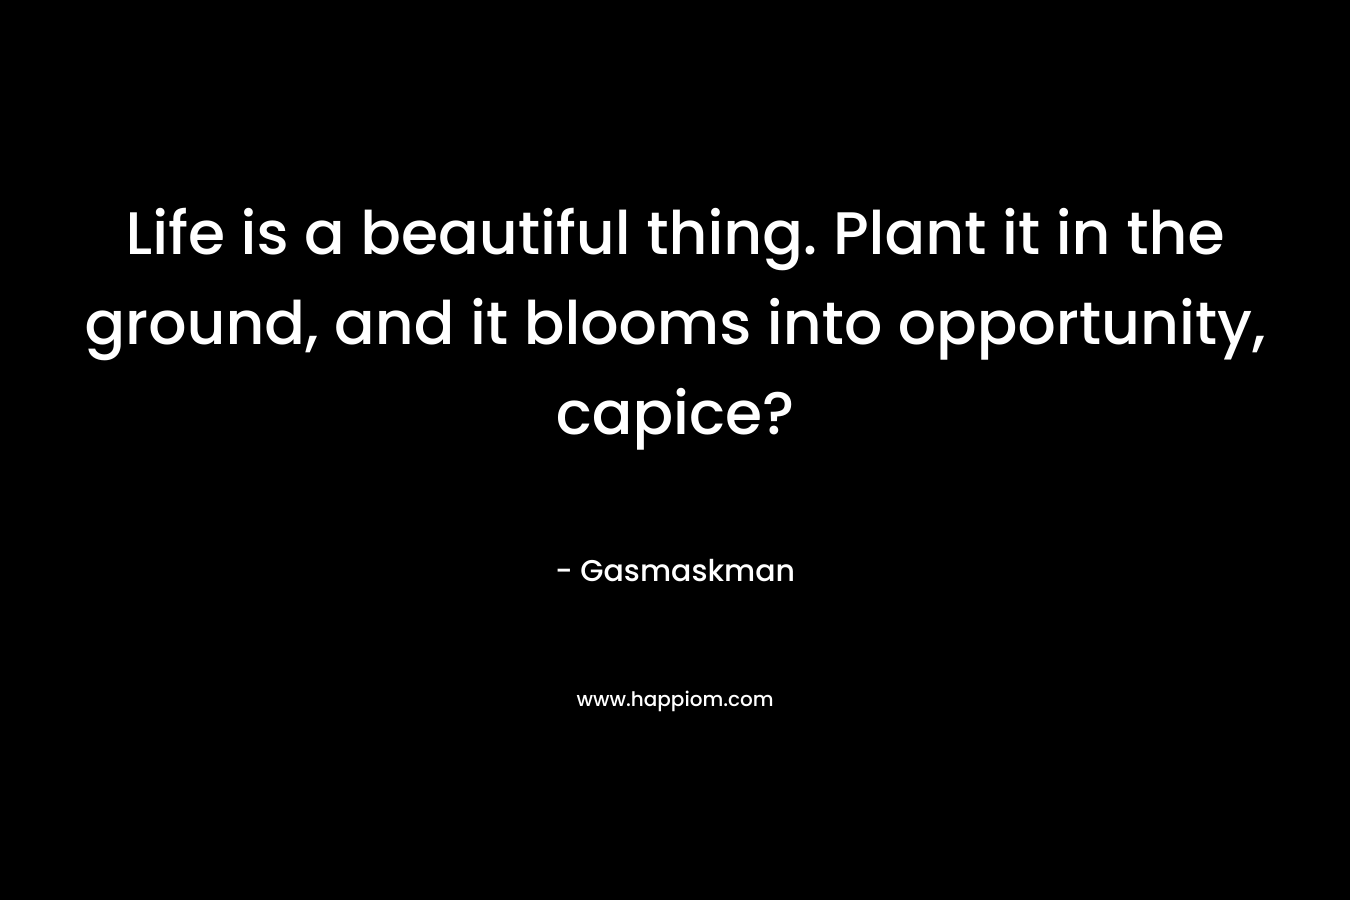 Life is a beautiful thing. Plant it in the ground, and it blooms into opportunity, capice? – Gasmaskman